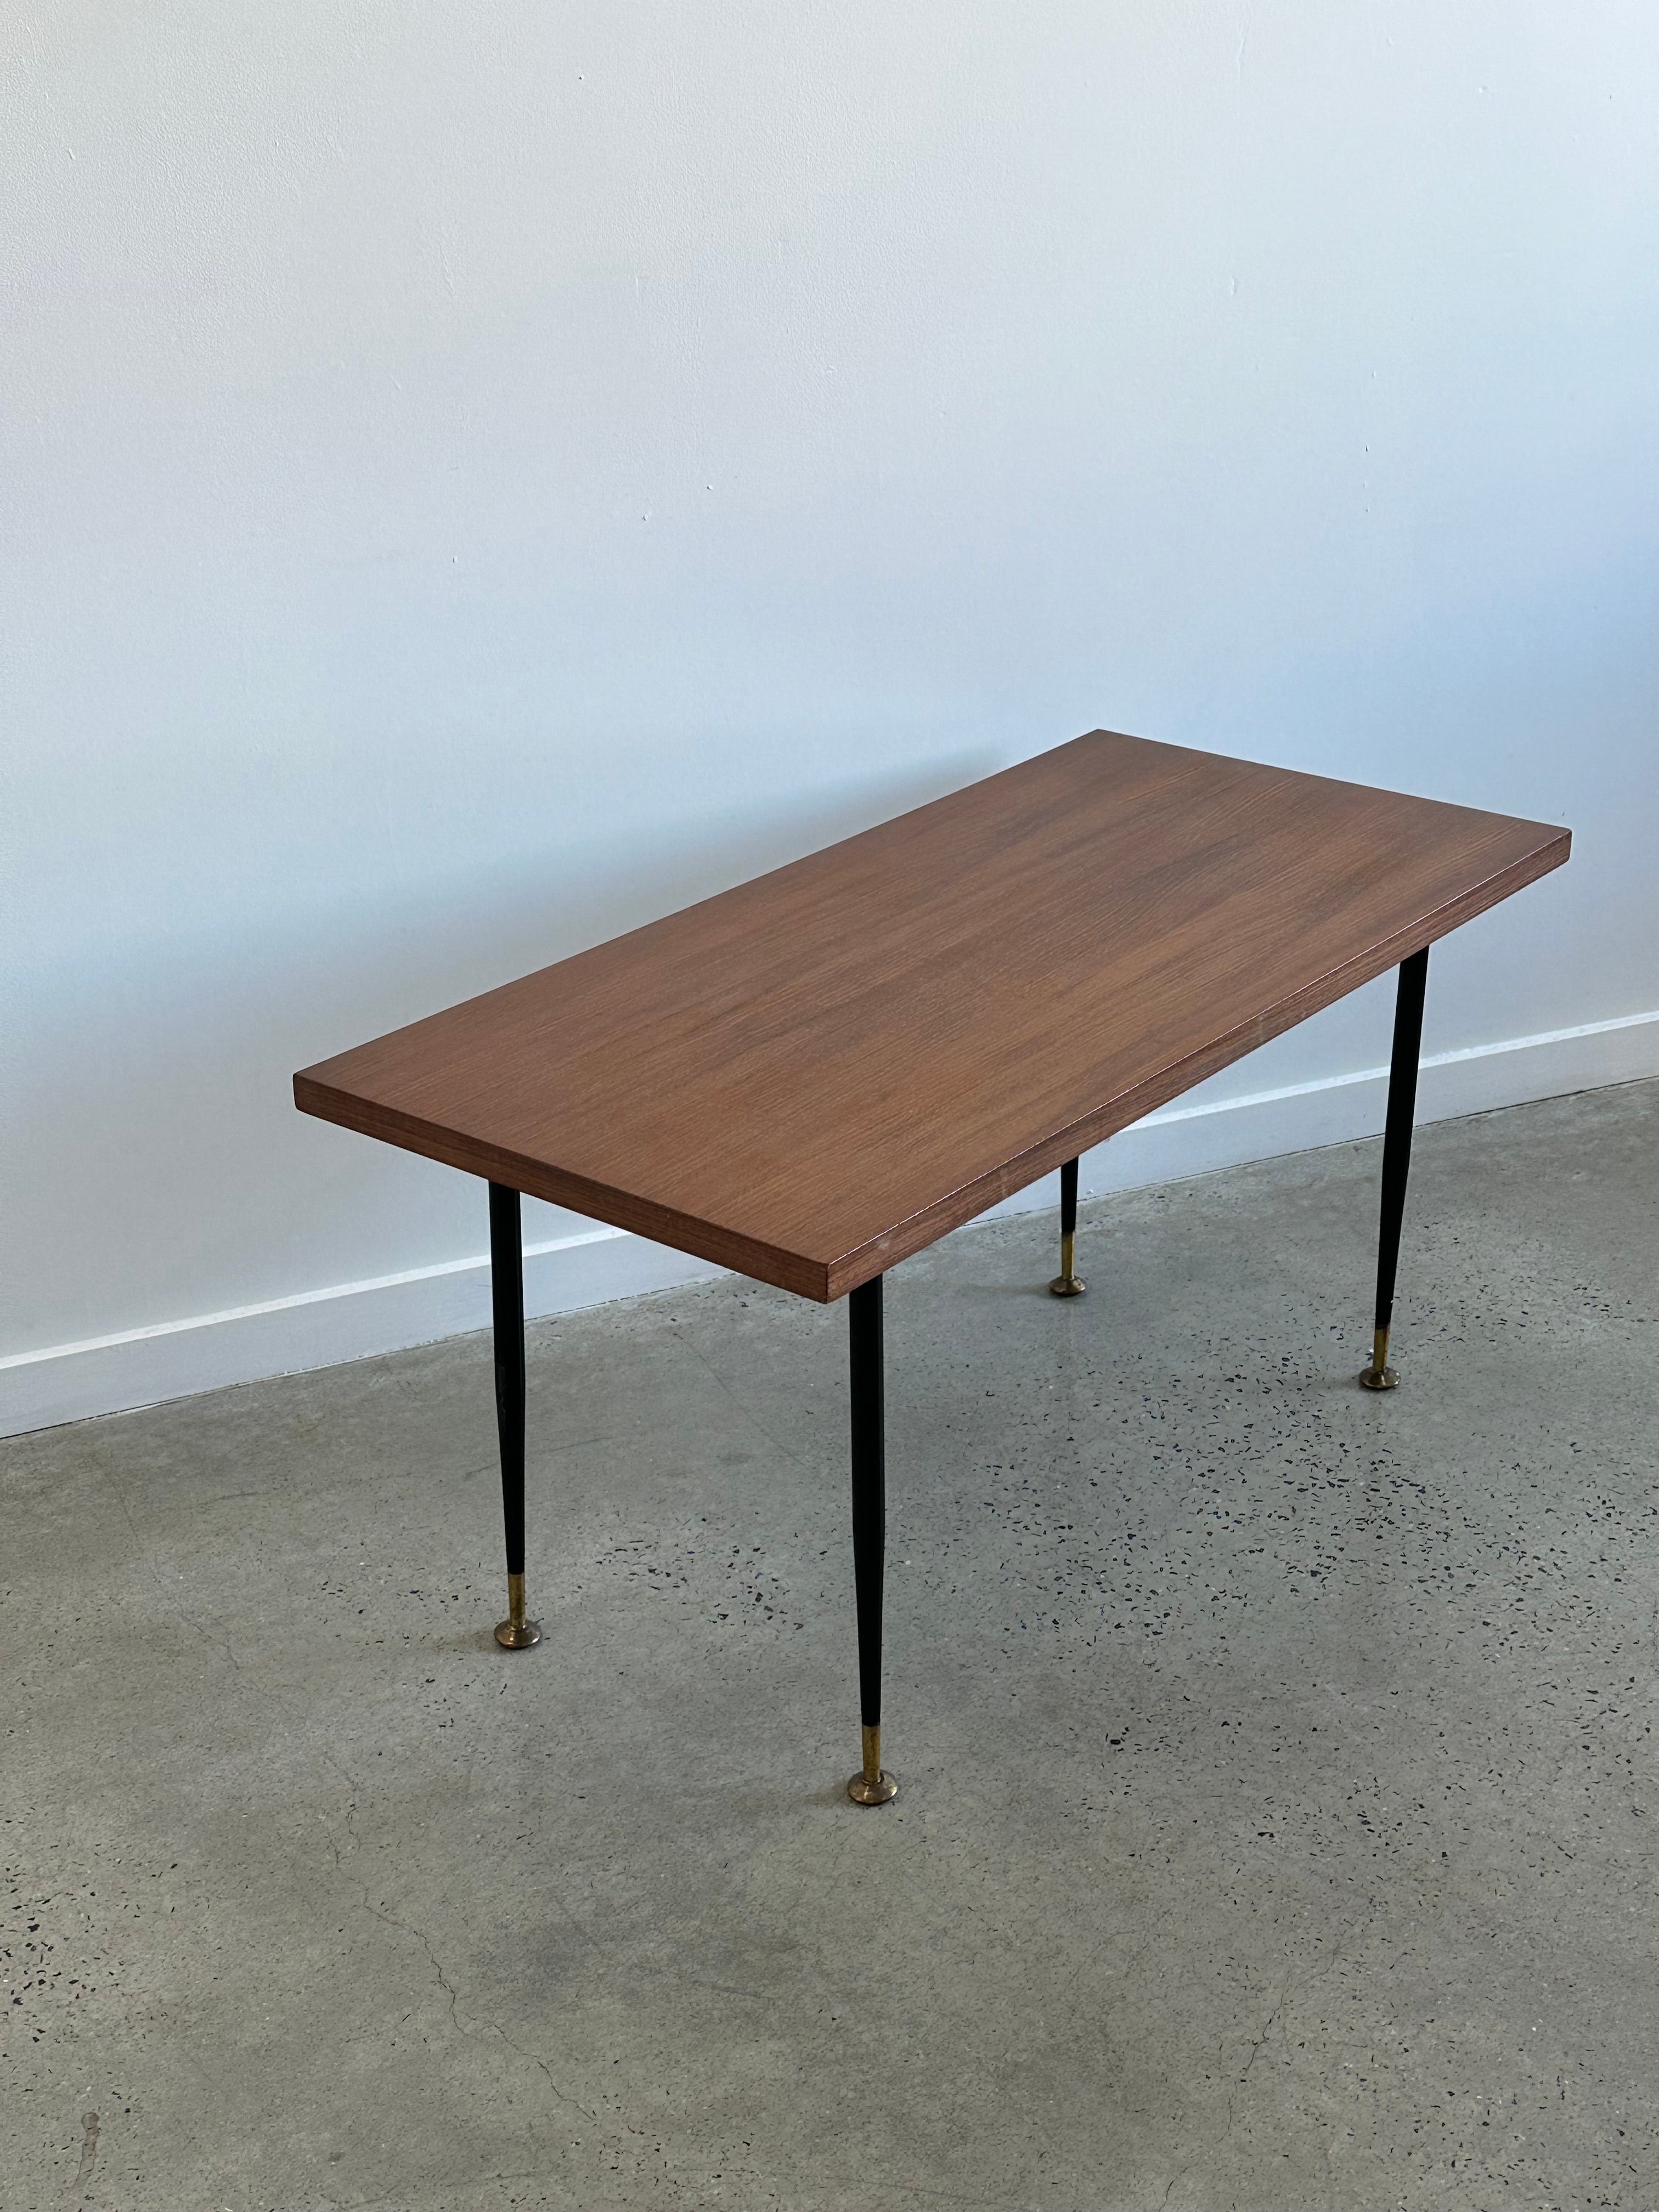 made in Italy during the 1950s. It features a combination of brass and teak timber materials, which were popular choices for furniture design during that era.

Brass was often used for the legs or structural elements of furniture due to its